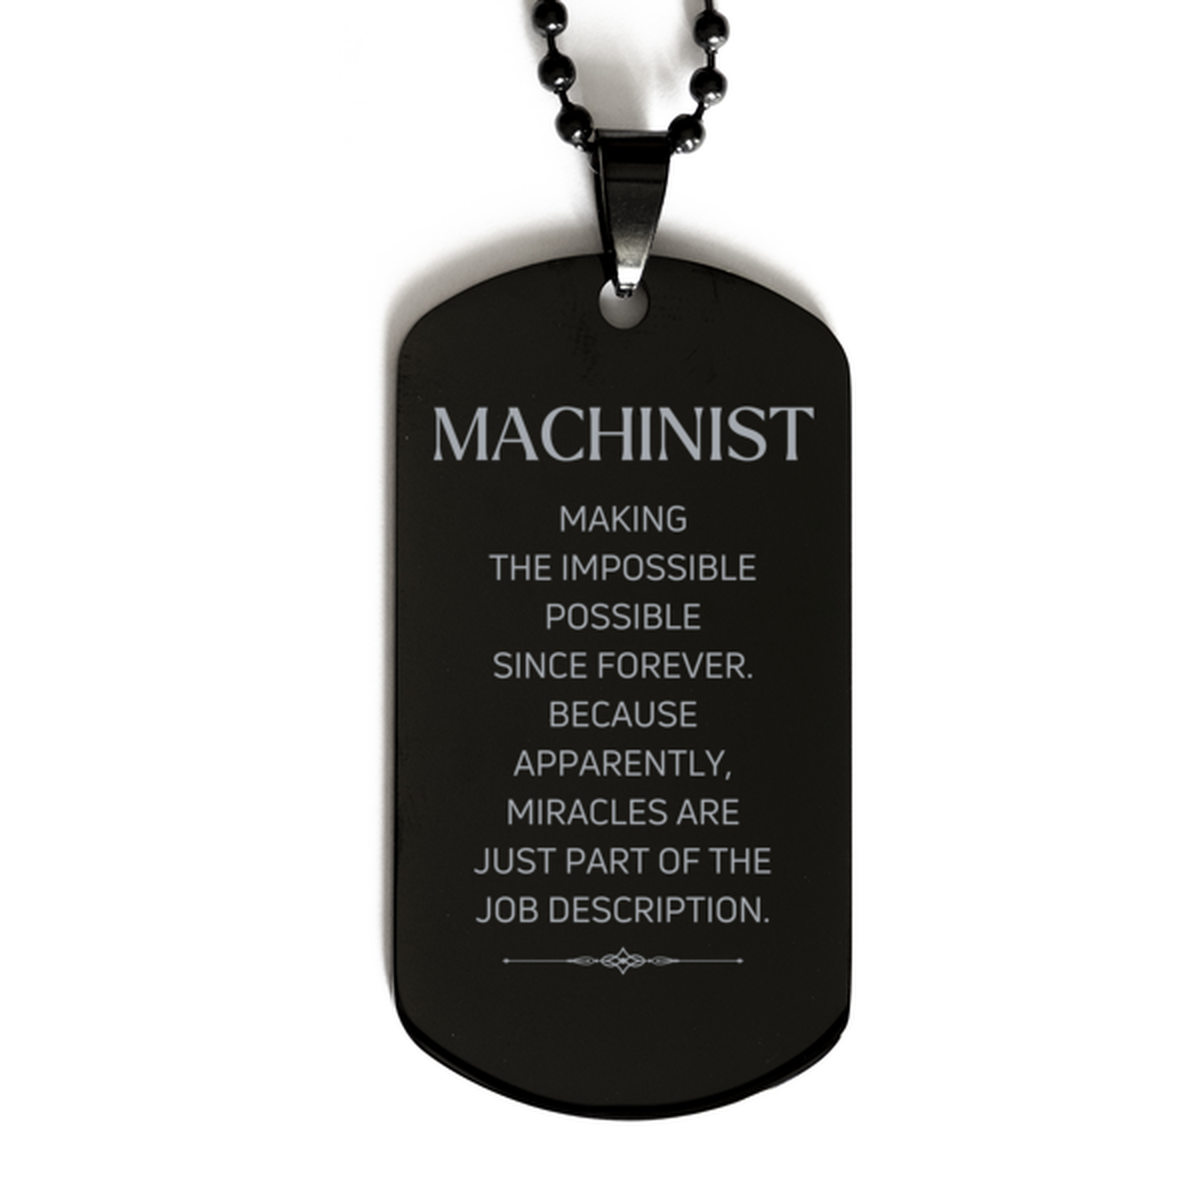 Funny Machinist Gifts, Miracles are just part of the job description, Inspirational Birthday Black Dog Tag For Machinist, Men, Women, Coworkers, Friends, Boss